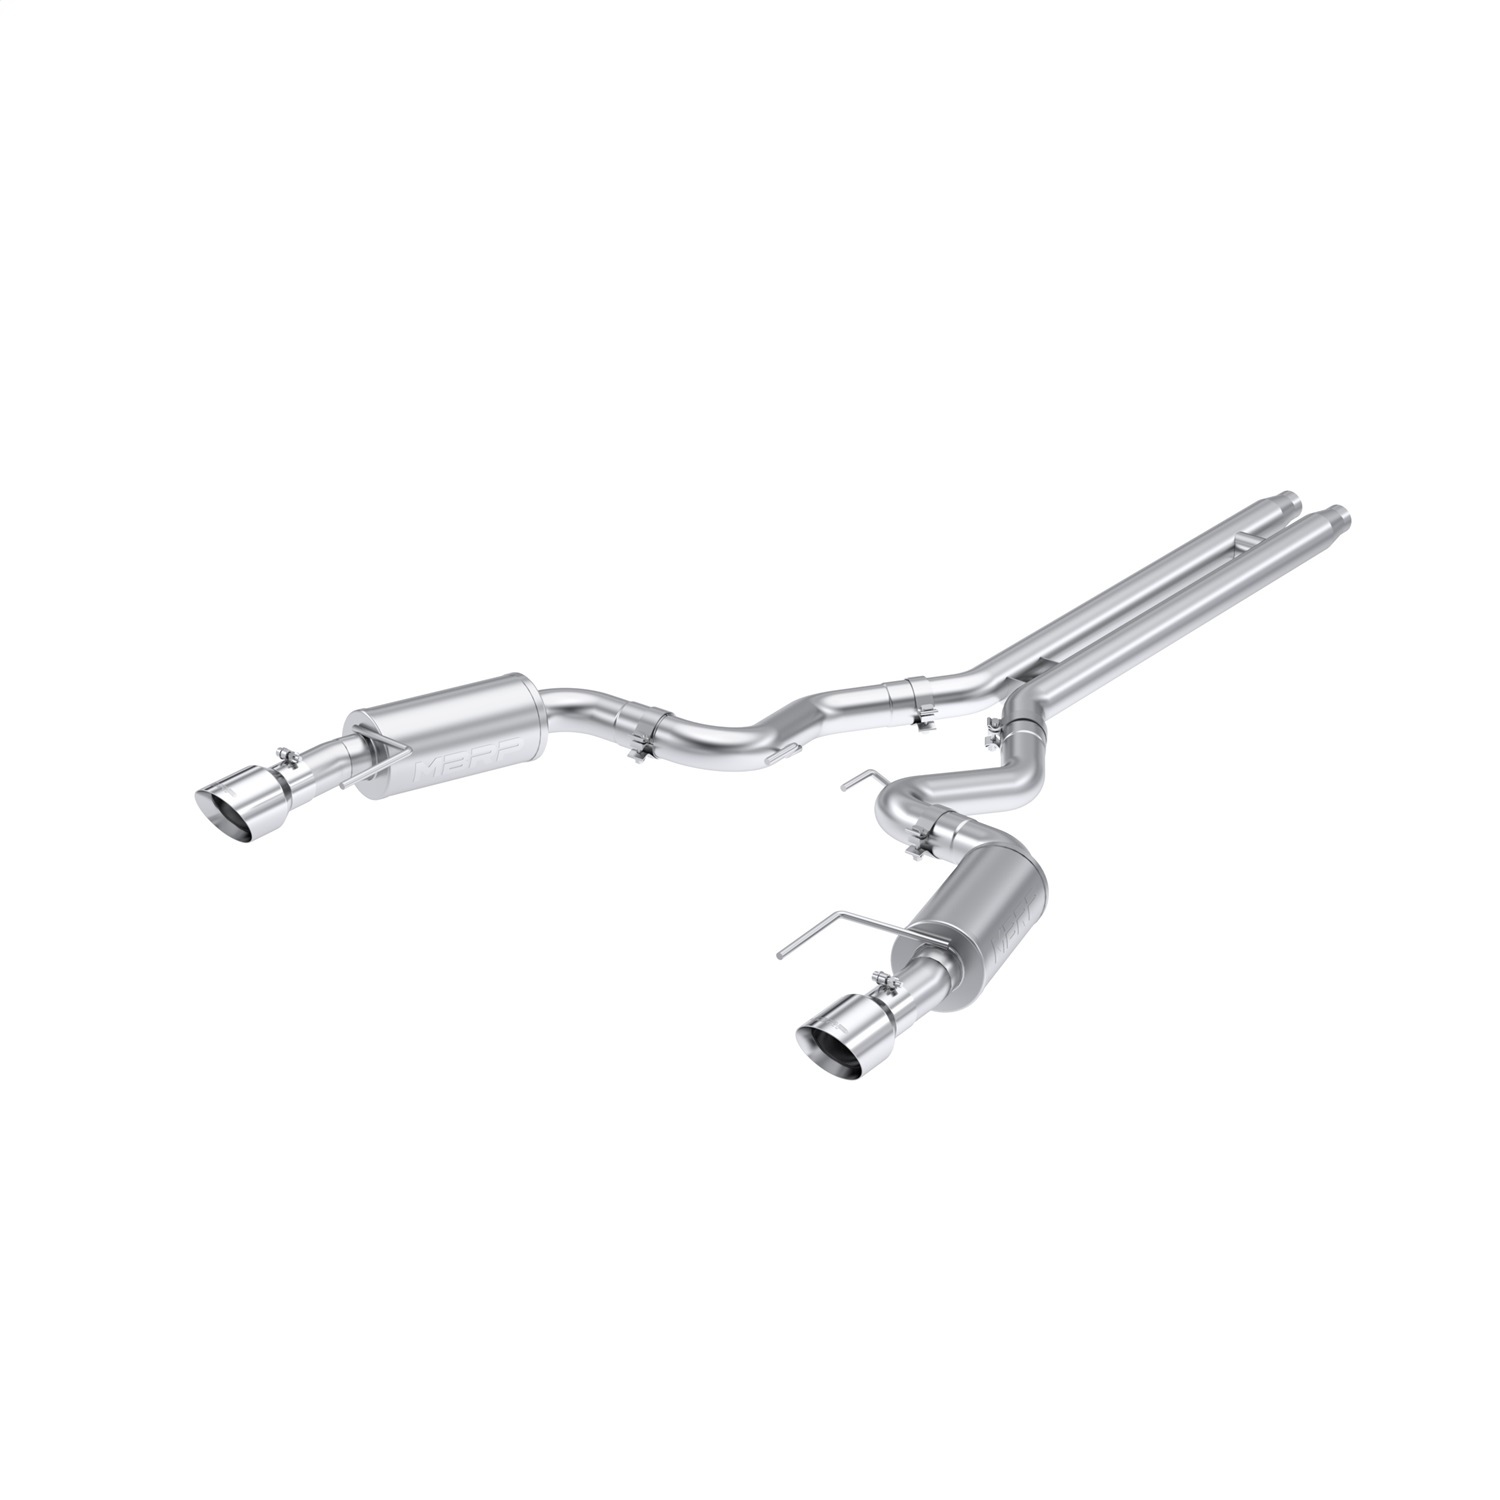 MBRP Exhaust S7251AL Armor Lite Cat Back Exhaust System Fits 24 Mustang